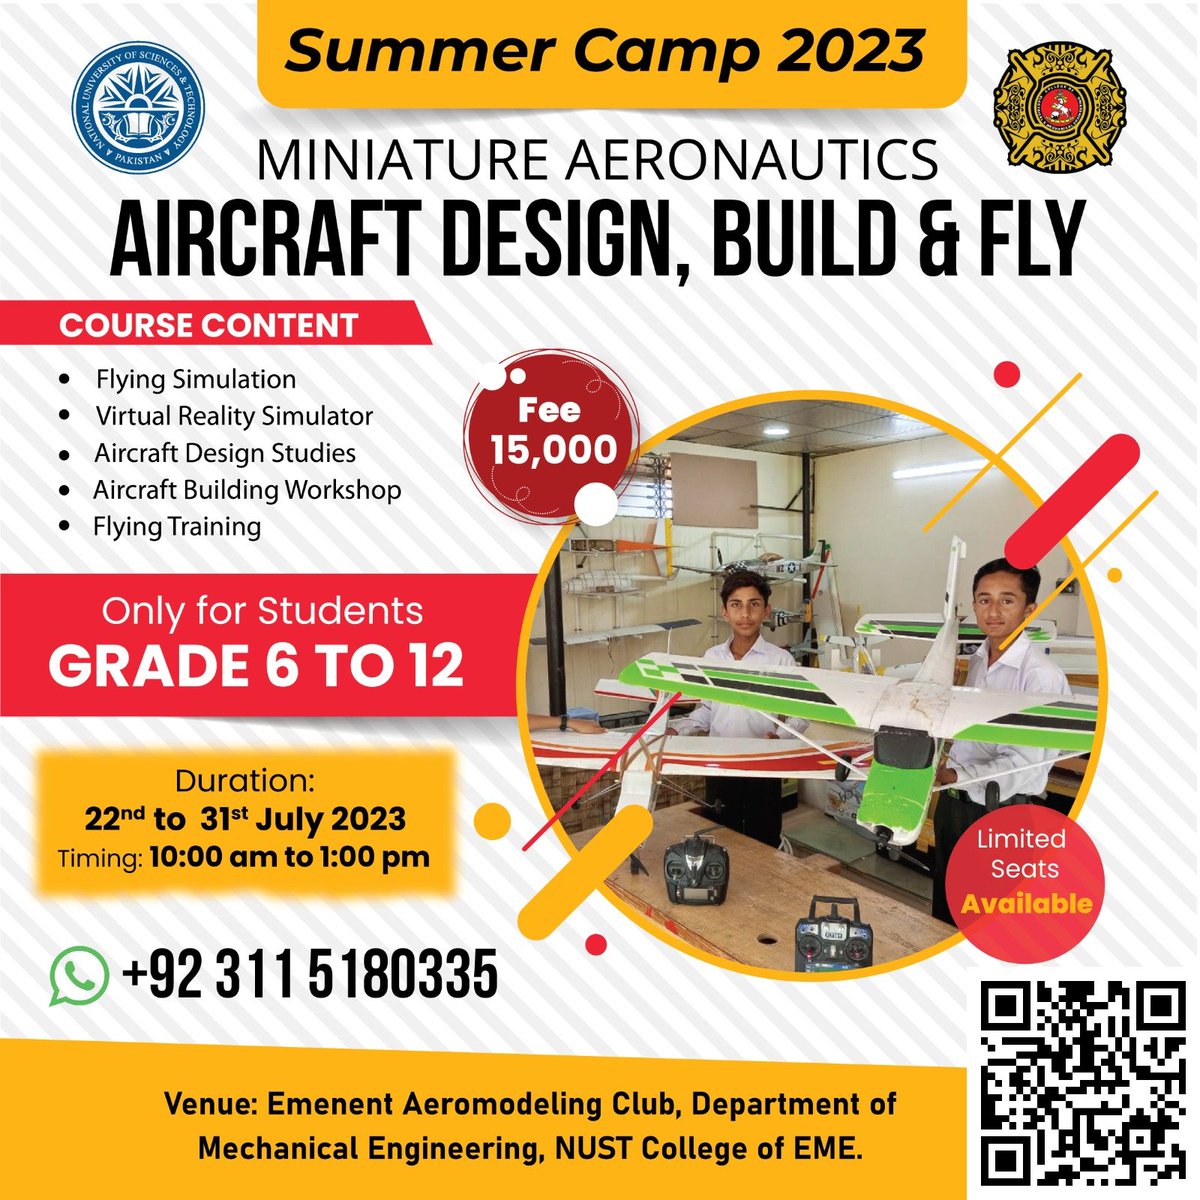 🚀 Calling young aviation enthusiasts! 📷 Ignite your imagination this summer with an exciting aeromodelling training at NUST College of E&ME. #aeromodellingclub #summercamp2023 #aviationeducation #nust #aviation #aircraft #engineer #aviationenthusiast #aviationeducation